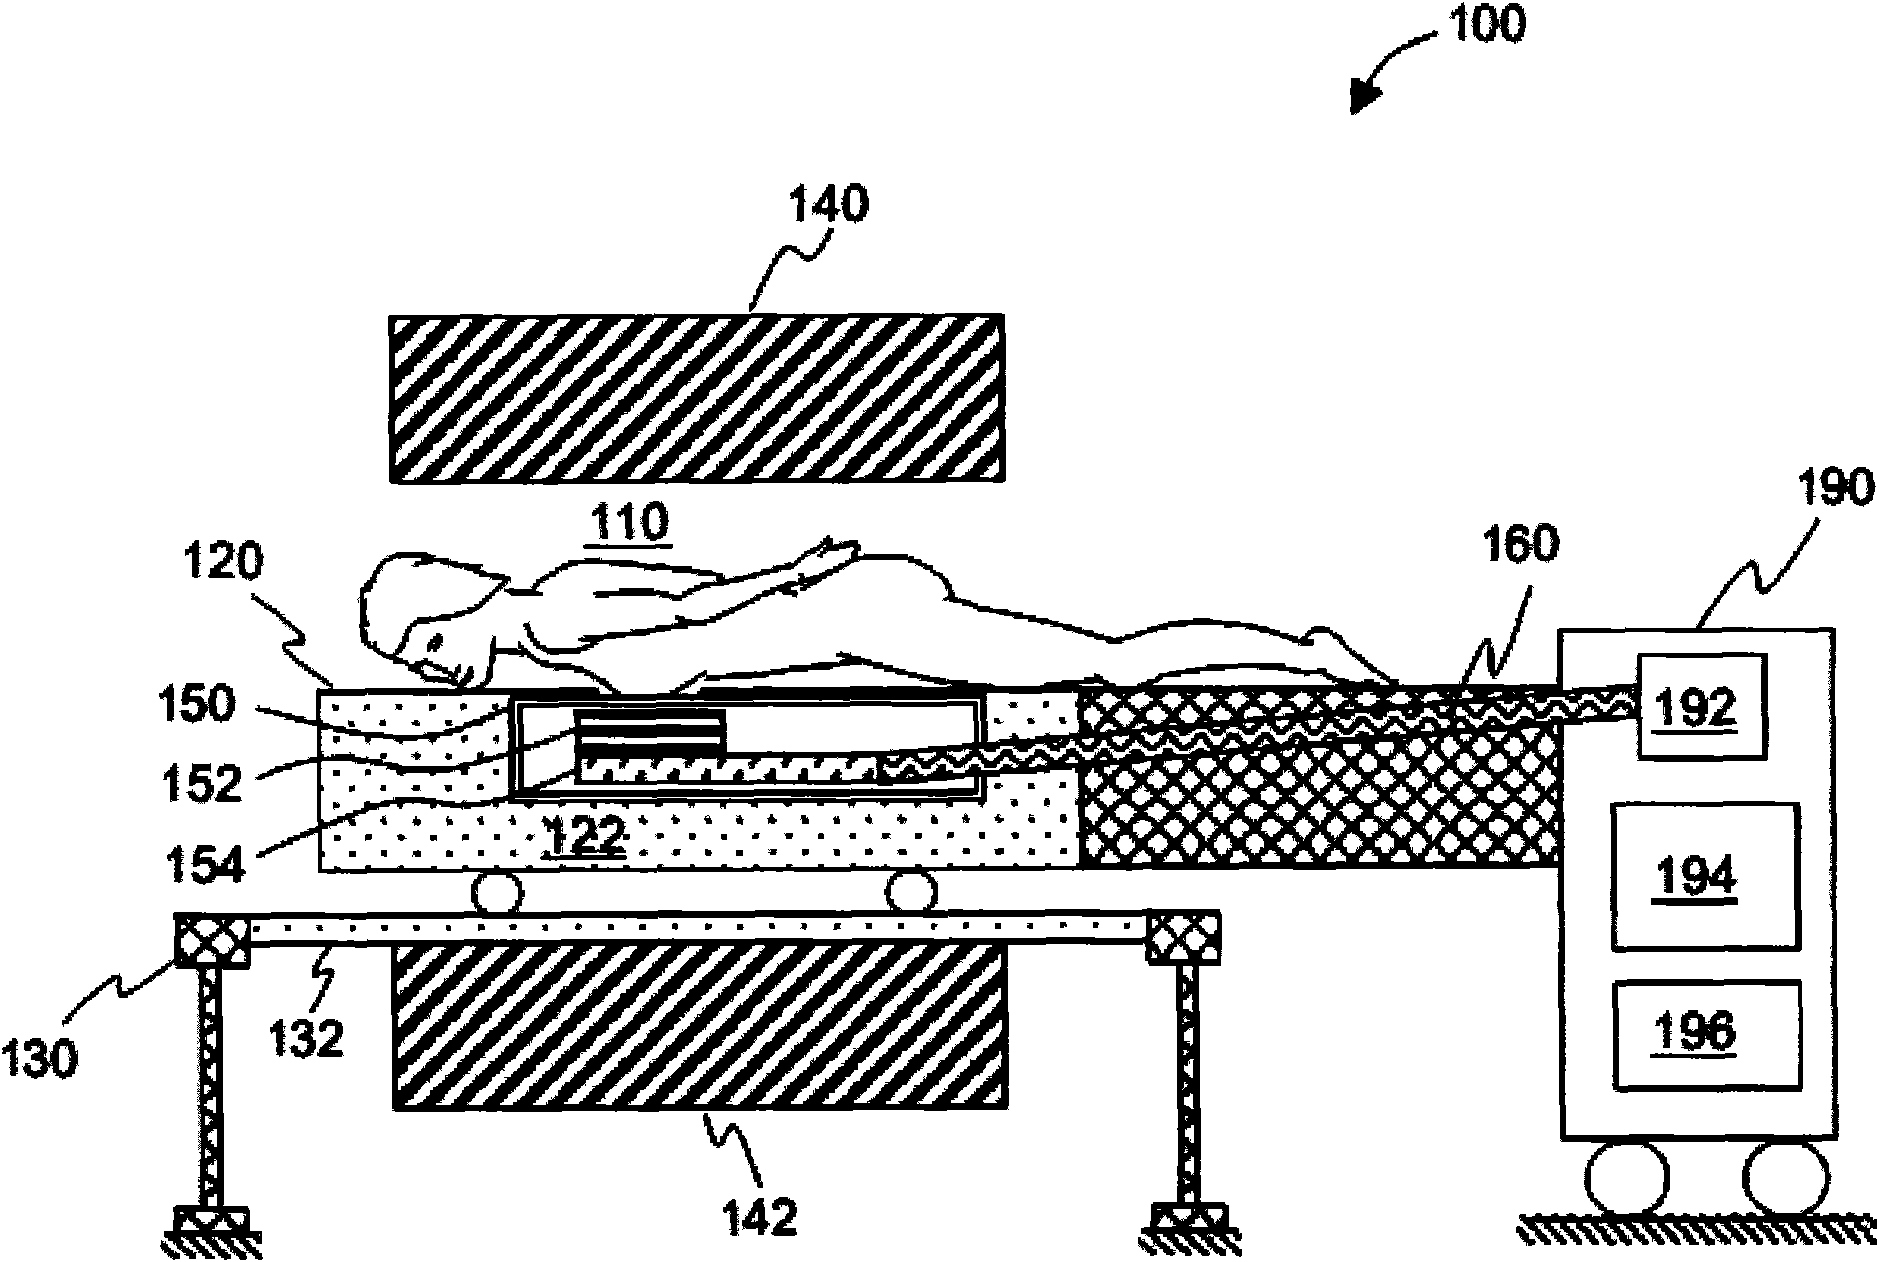 Superconducting magnetic resonance imaging machine used for breast disease diagnosis, and construction method and use thereof